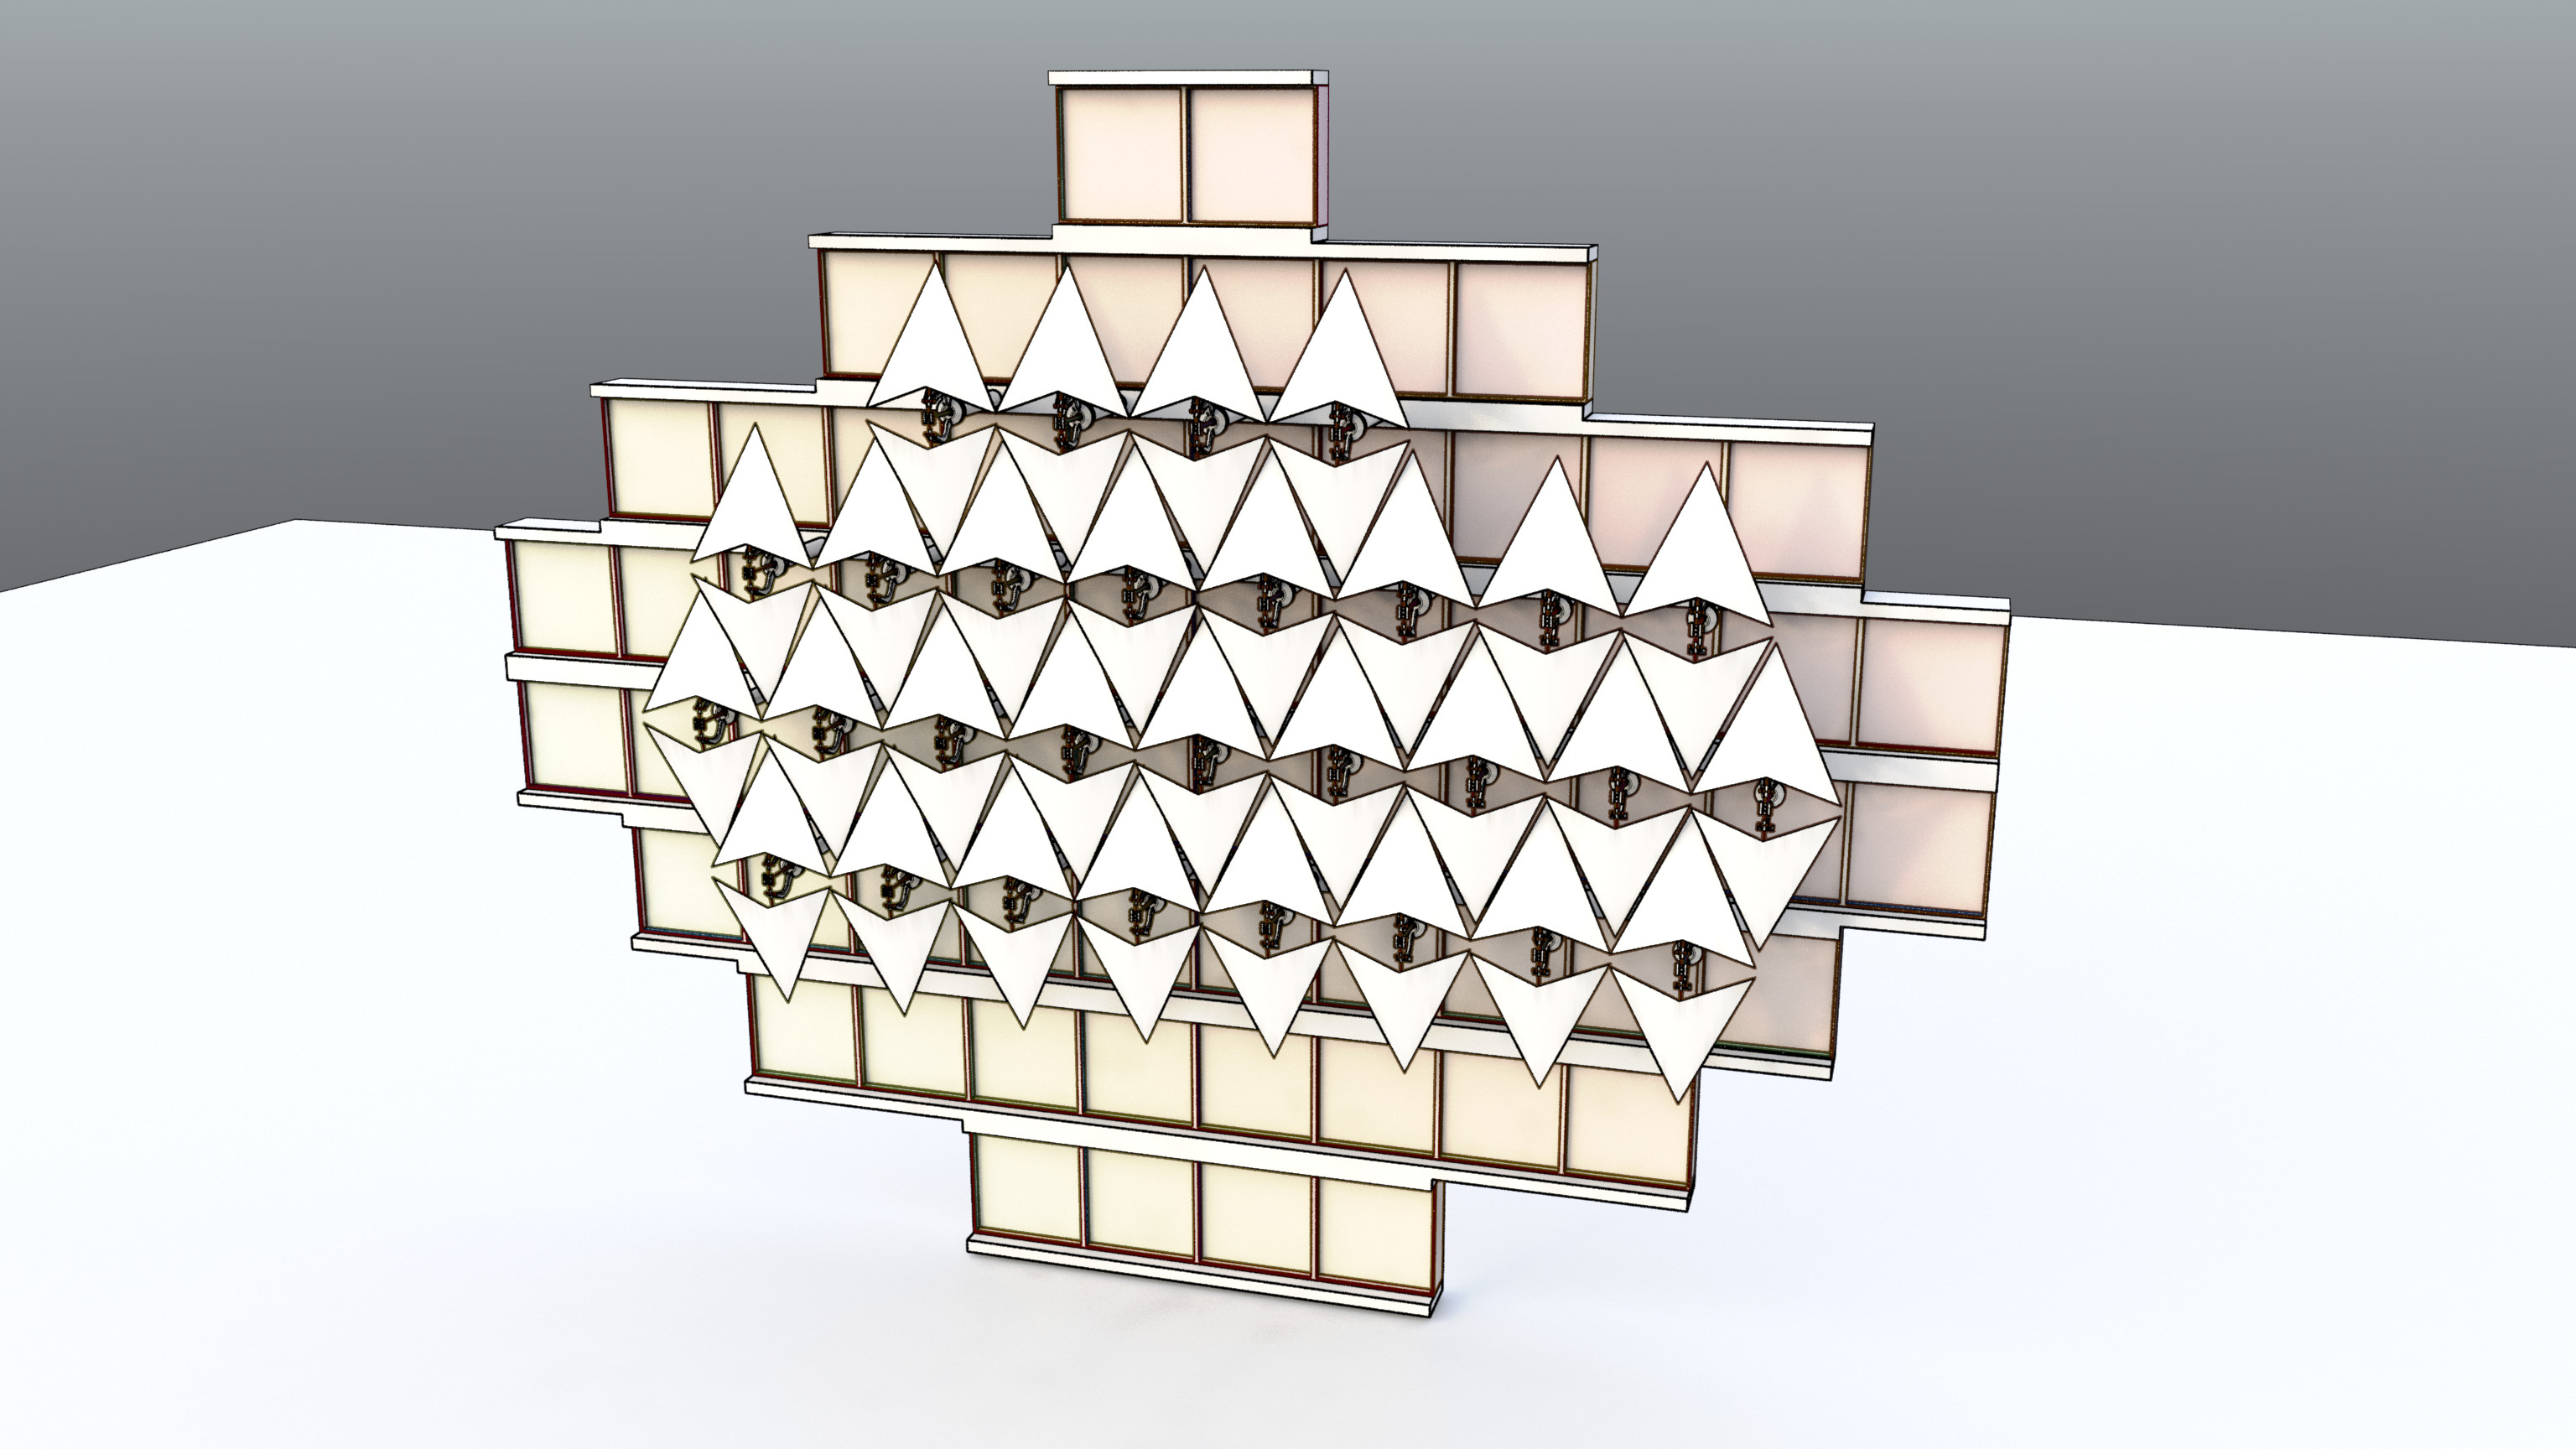 180º opposed scales setup: maximum shading over rectilinear static façade.